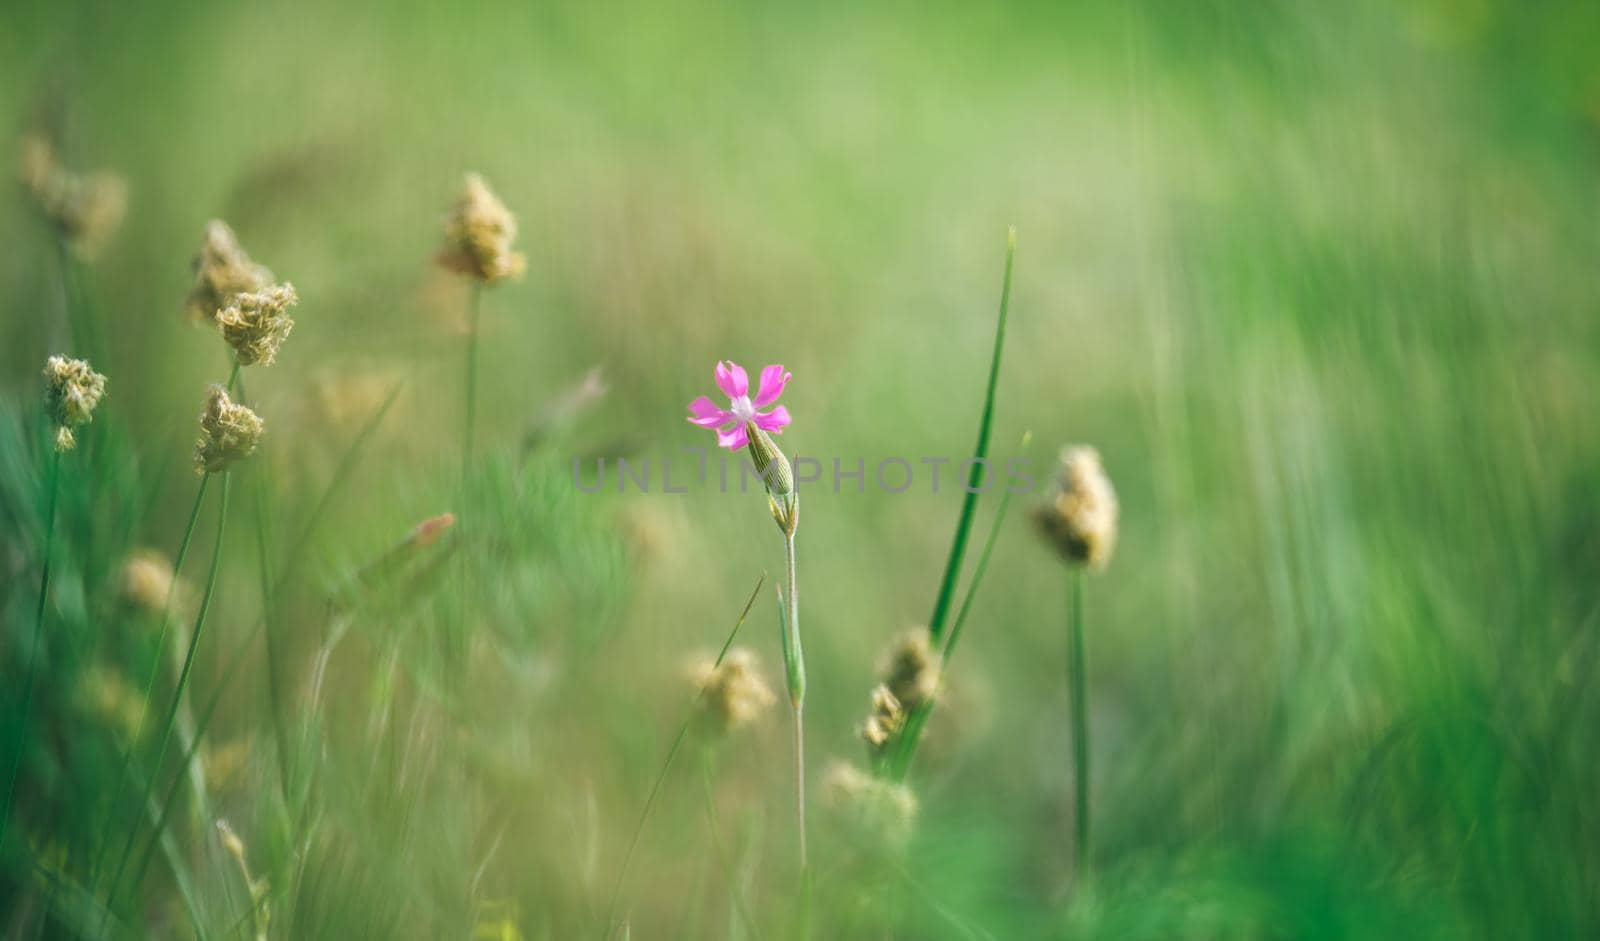 Delicate purple flower in a field on nature in sunlight on a light green background macro. Wild flower in a spring, summer background Border template for design. An airy gentle artistic image by igor010